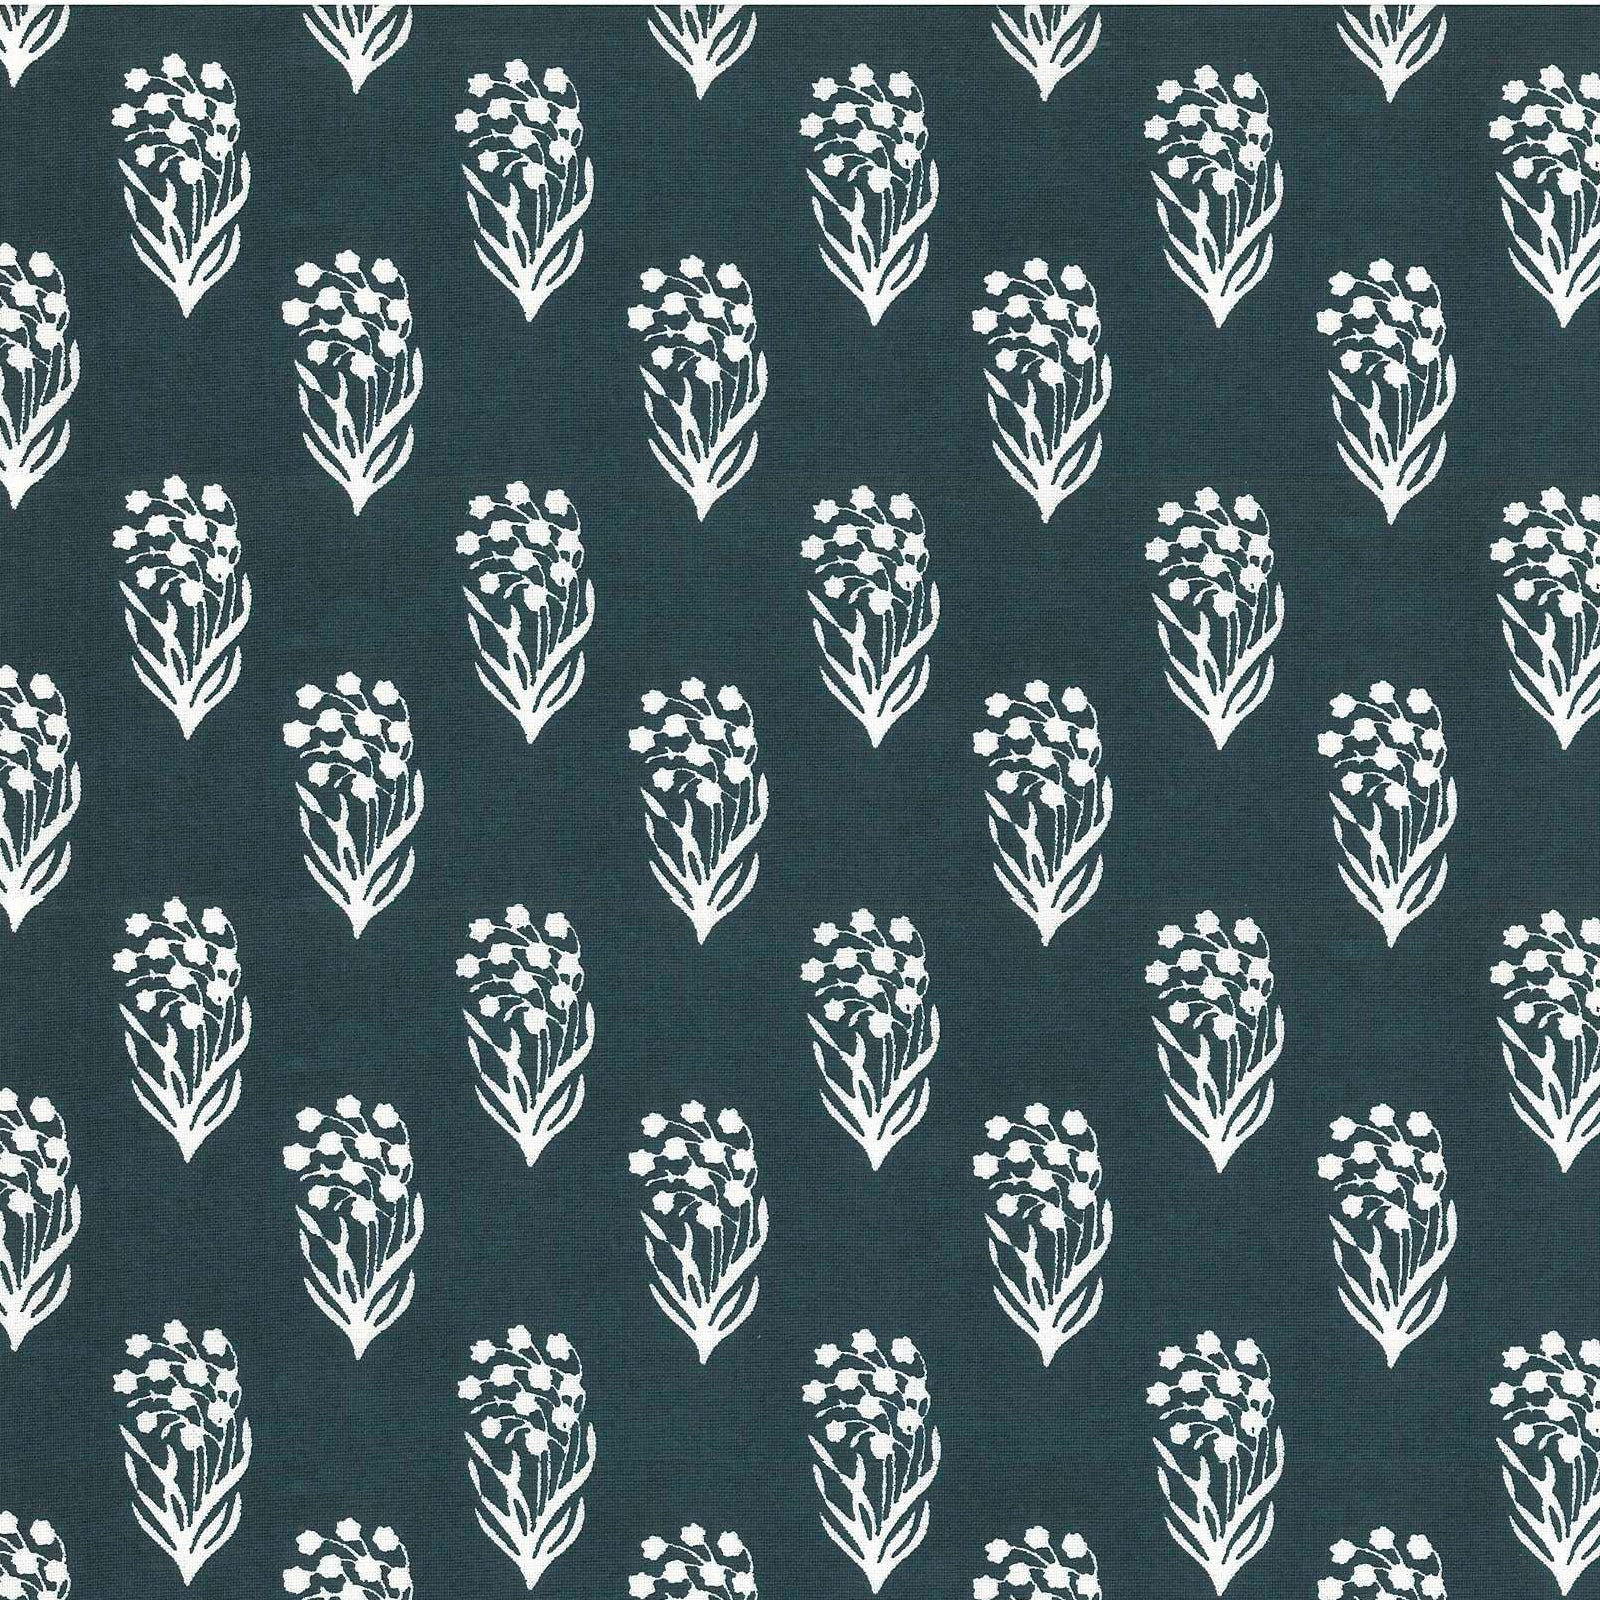 Highland Floral Fabric in Navy